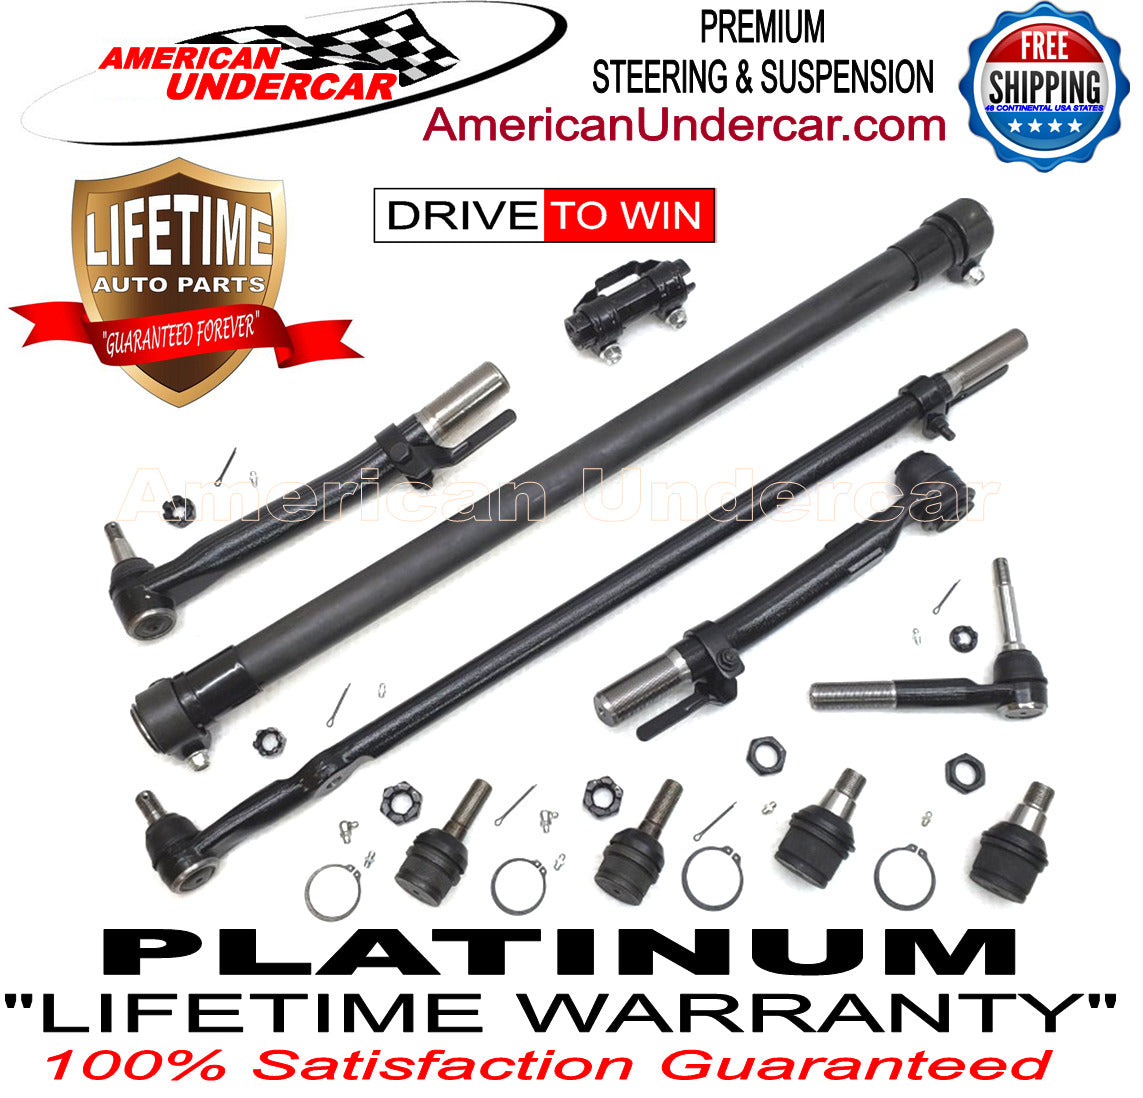 Lifetime Ball Joint Steering Suspension Kit for 2005-2010 Ford F450 Super Duty 4x4